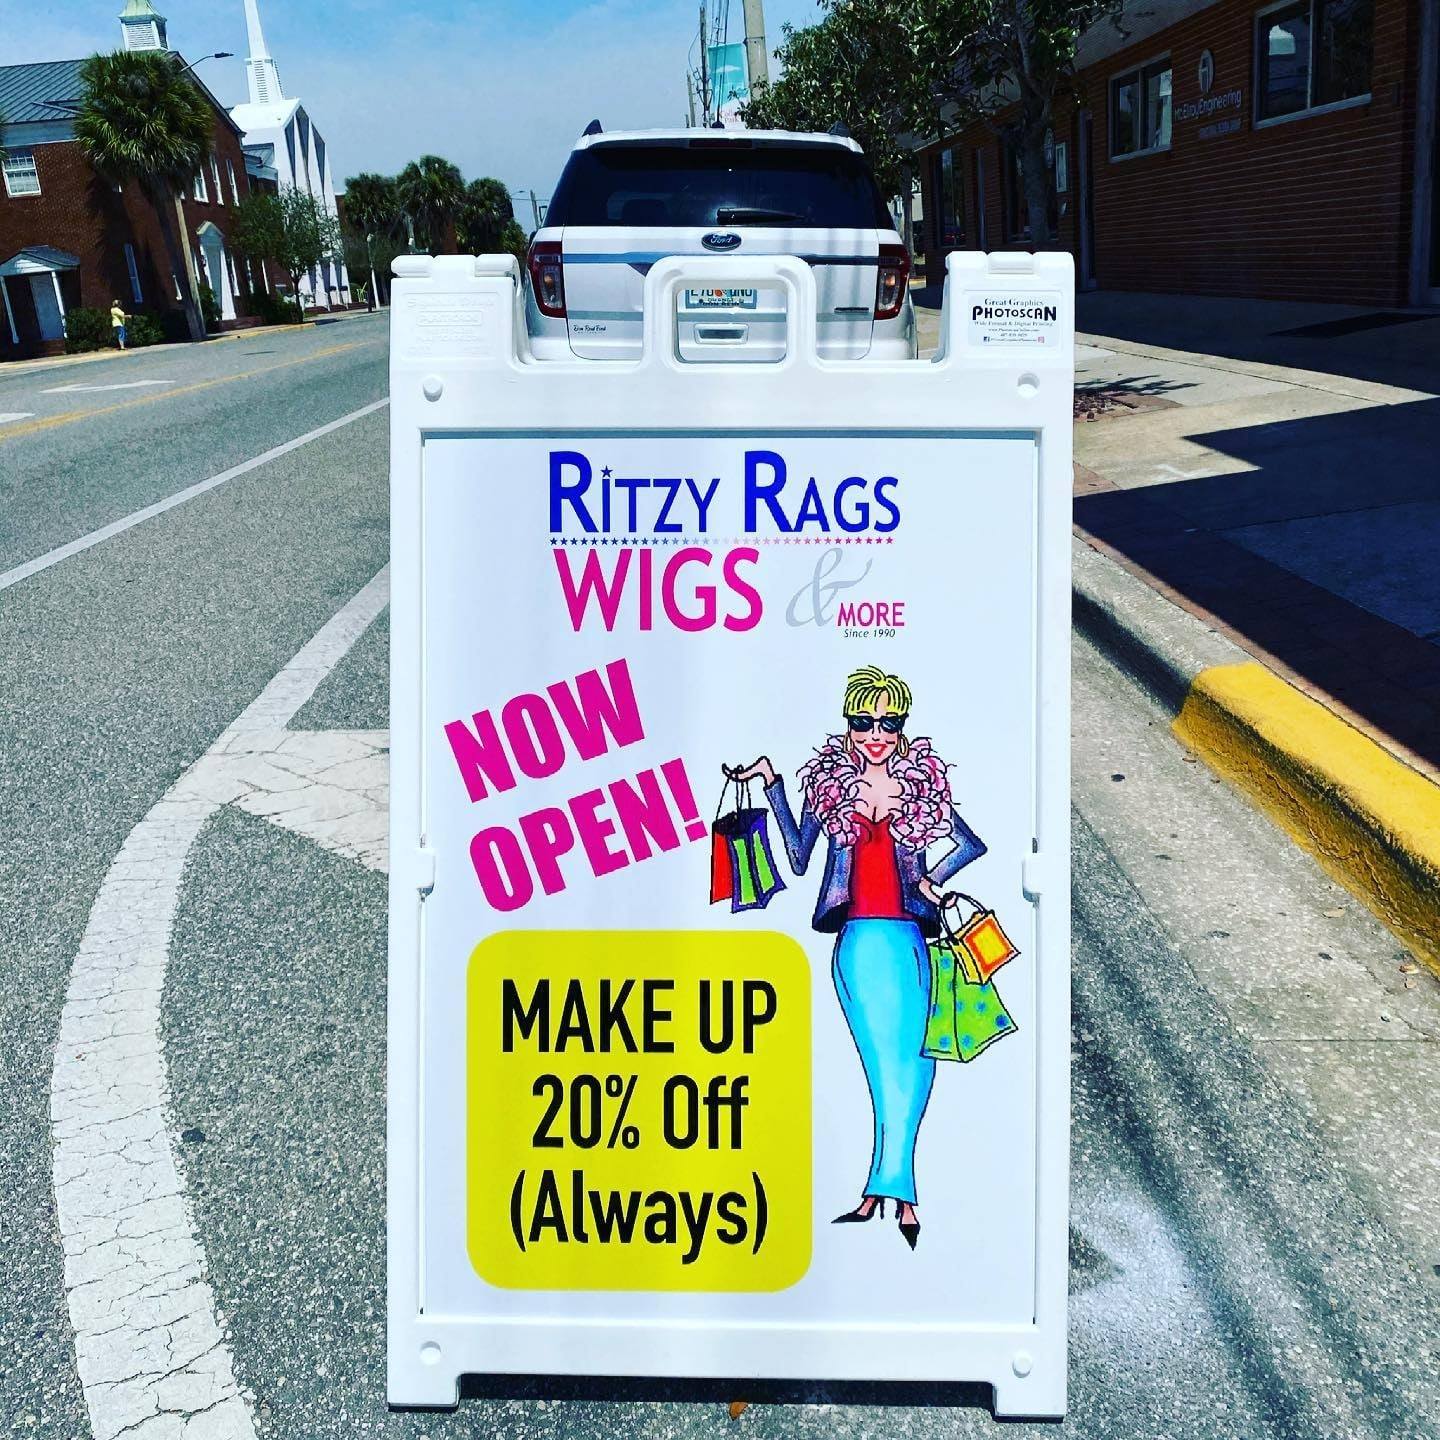 Ritzy Rags Wigs & More | 1833 Edgewater Dr, Orlando, FL 32804 | Phone: (407) 897-2117